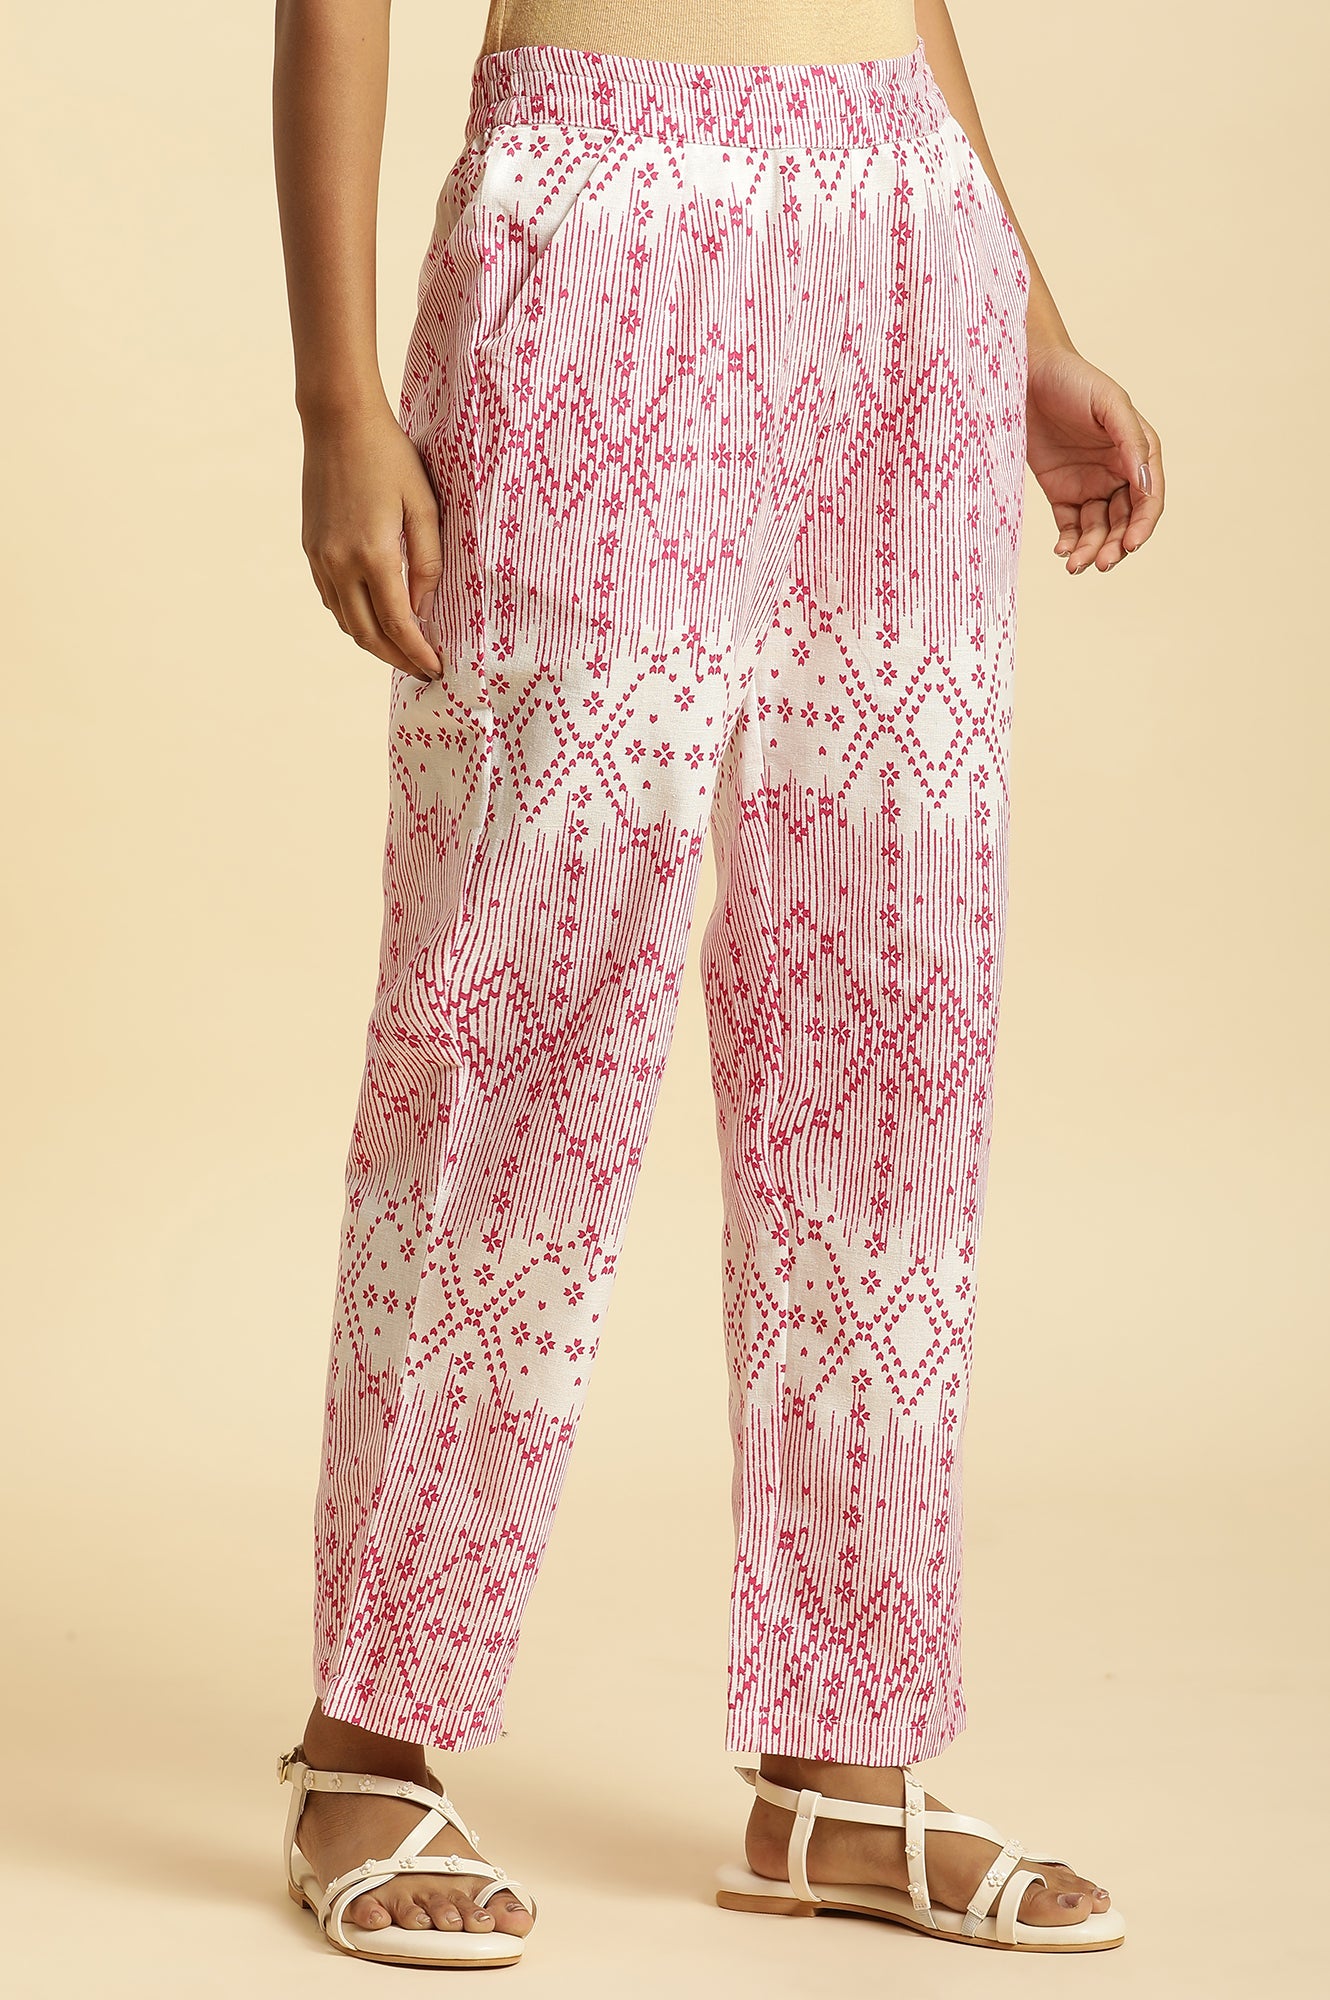 White Straight Pants With Pink Geometric Print